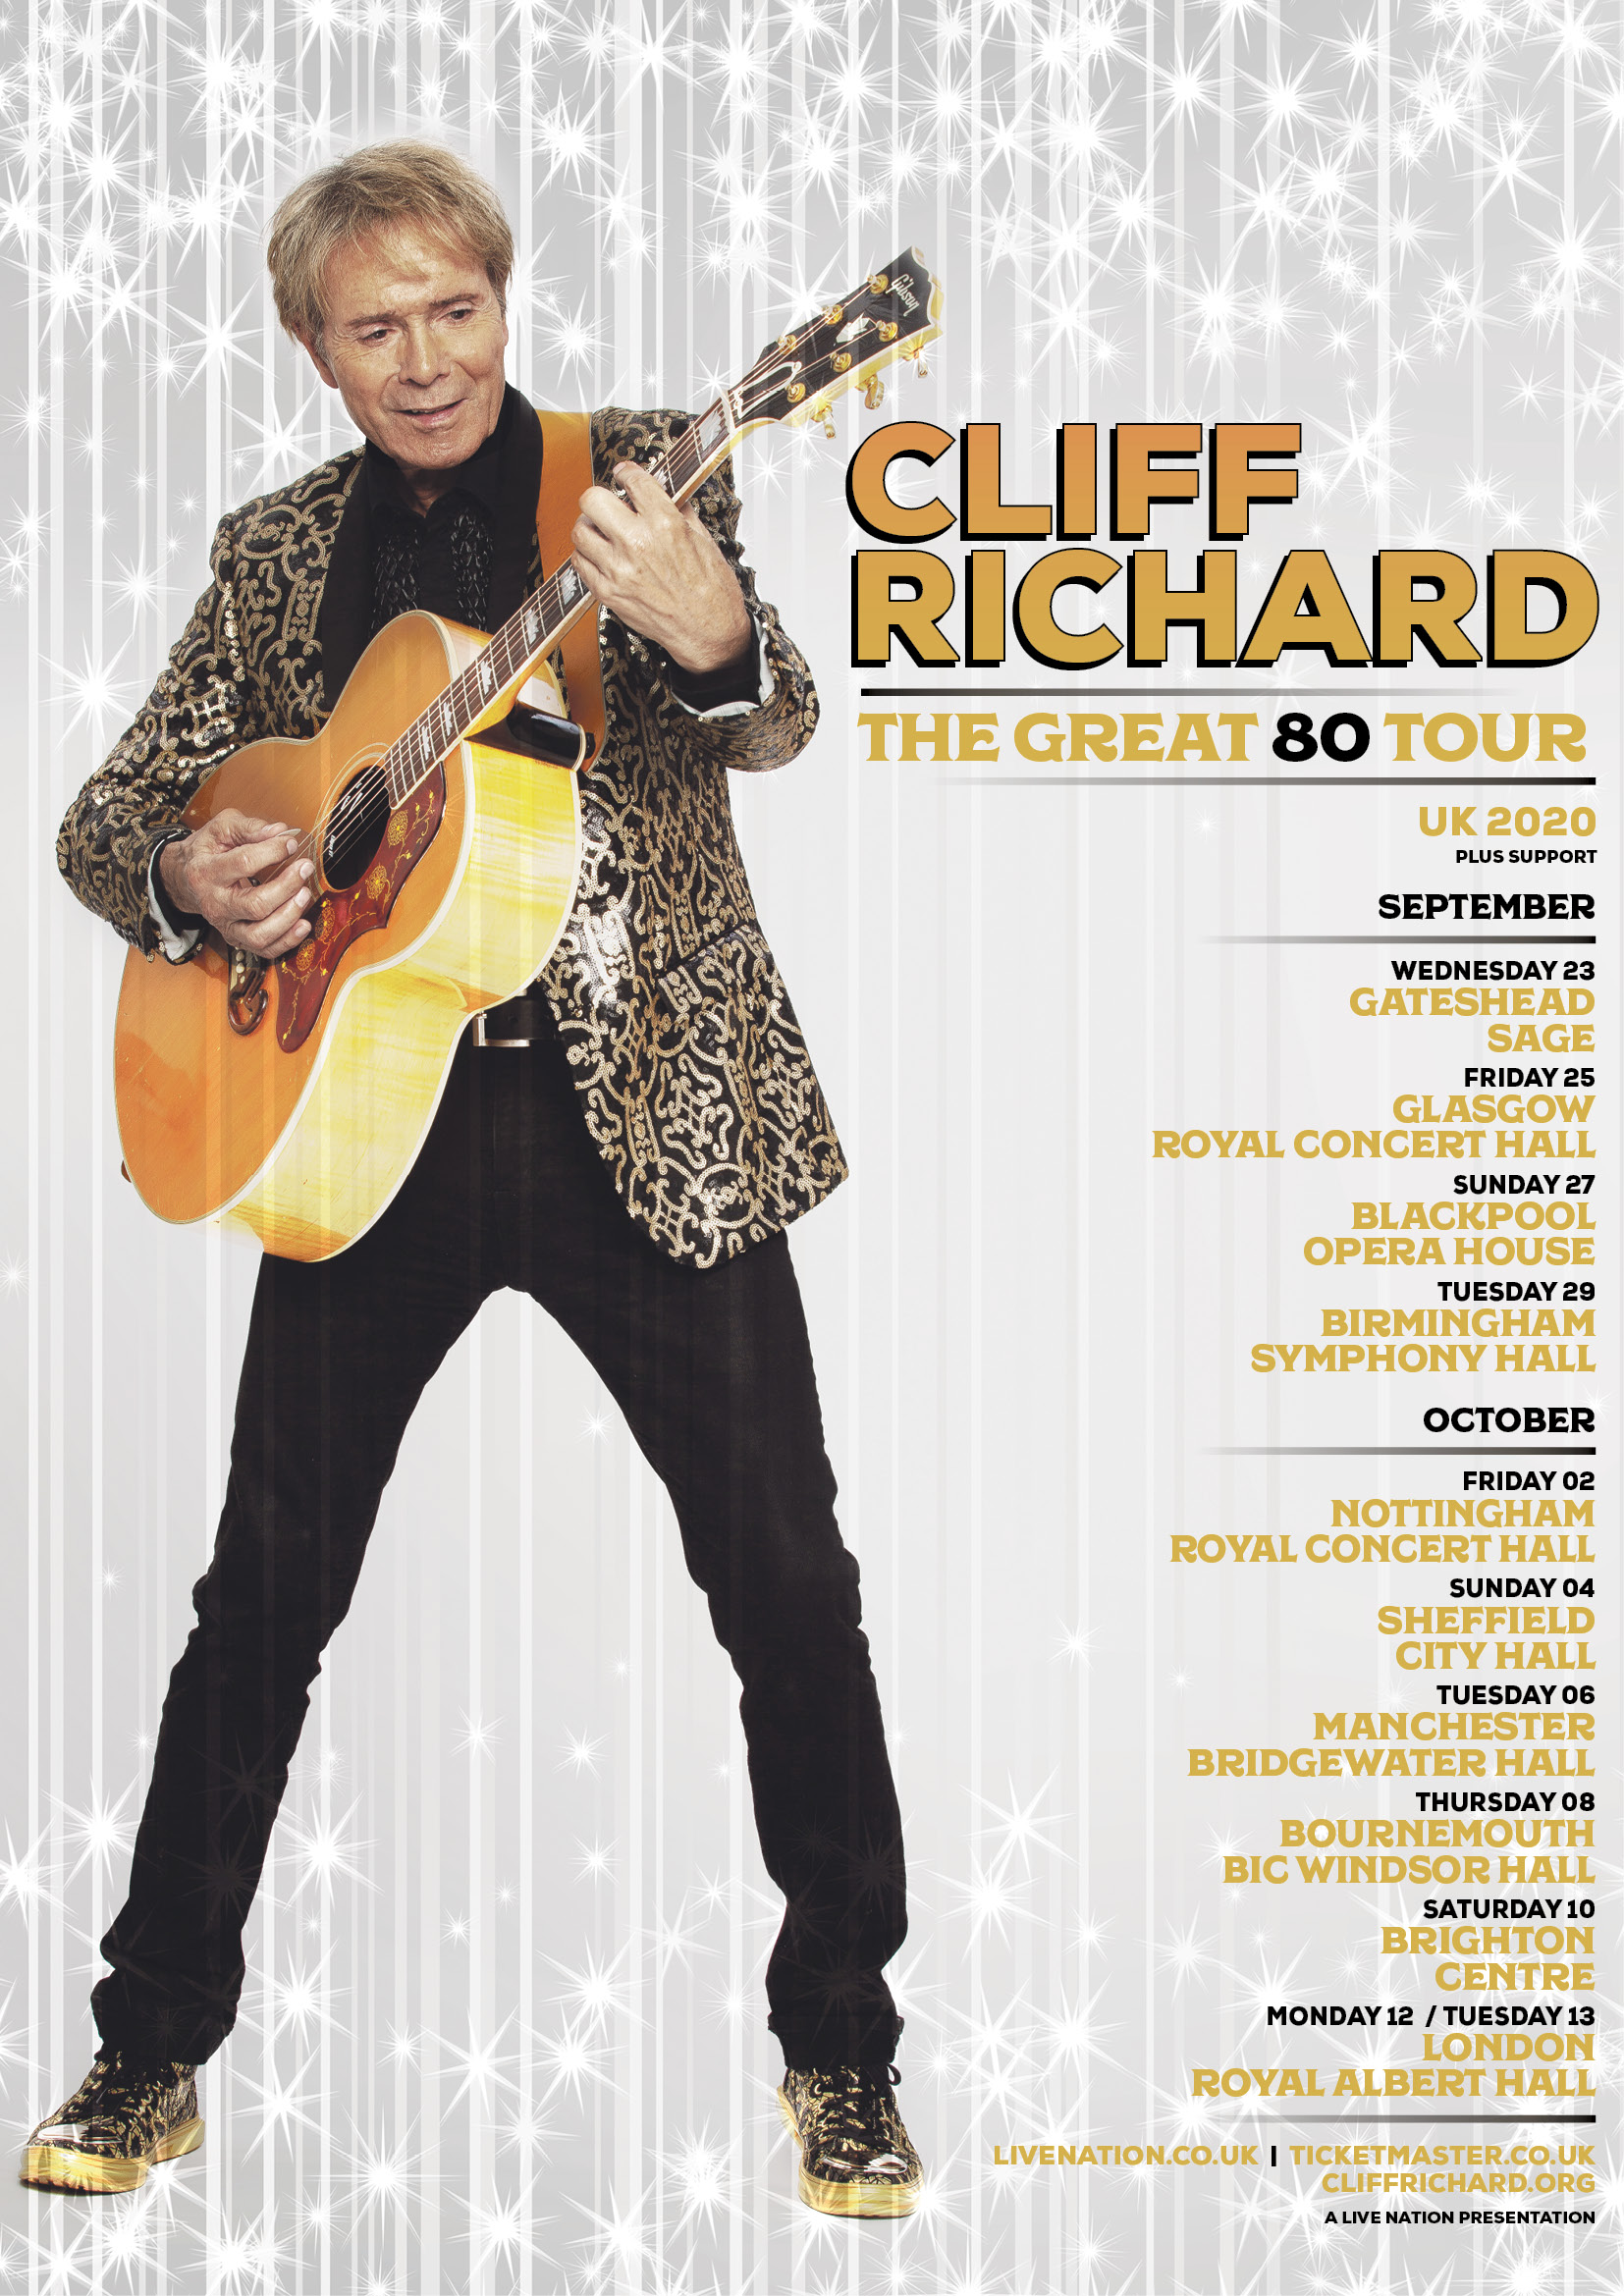 Sir Cliff Richard to embark on UK tour to coincide with 80th birthday BT